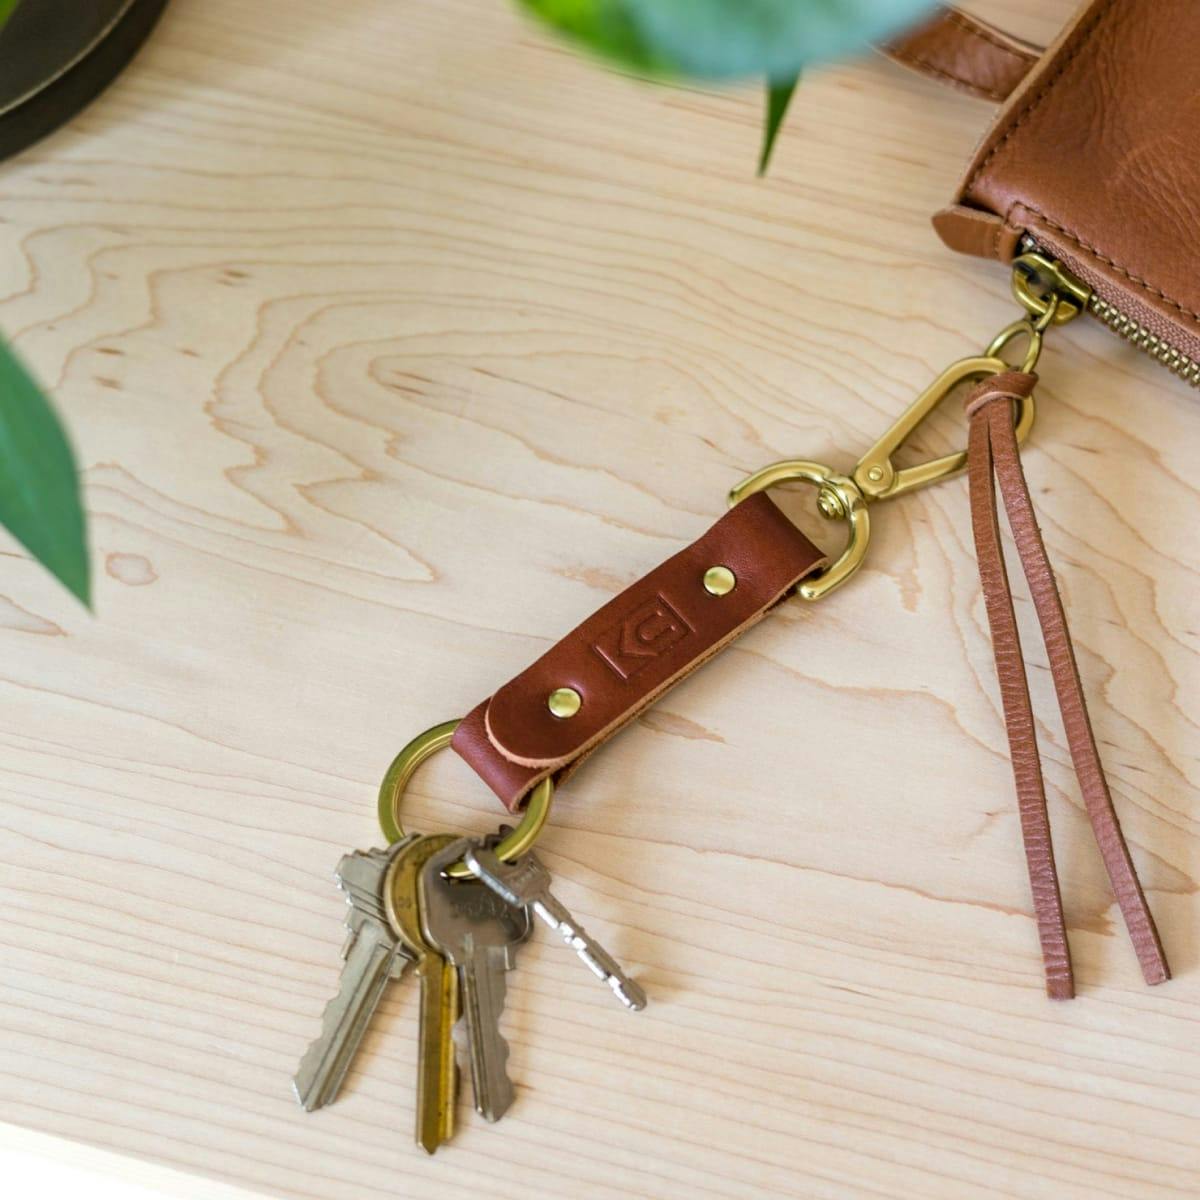 Brown leather key ring with brass metal loops and rivets on wood table.